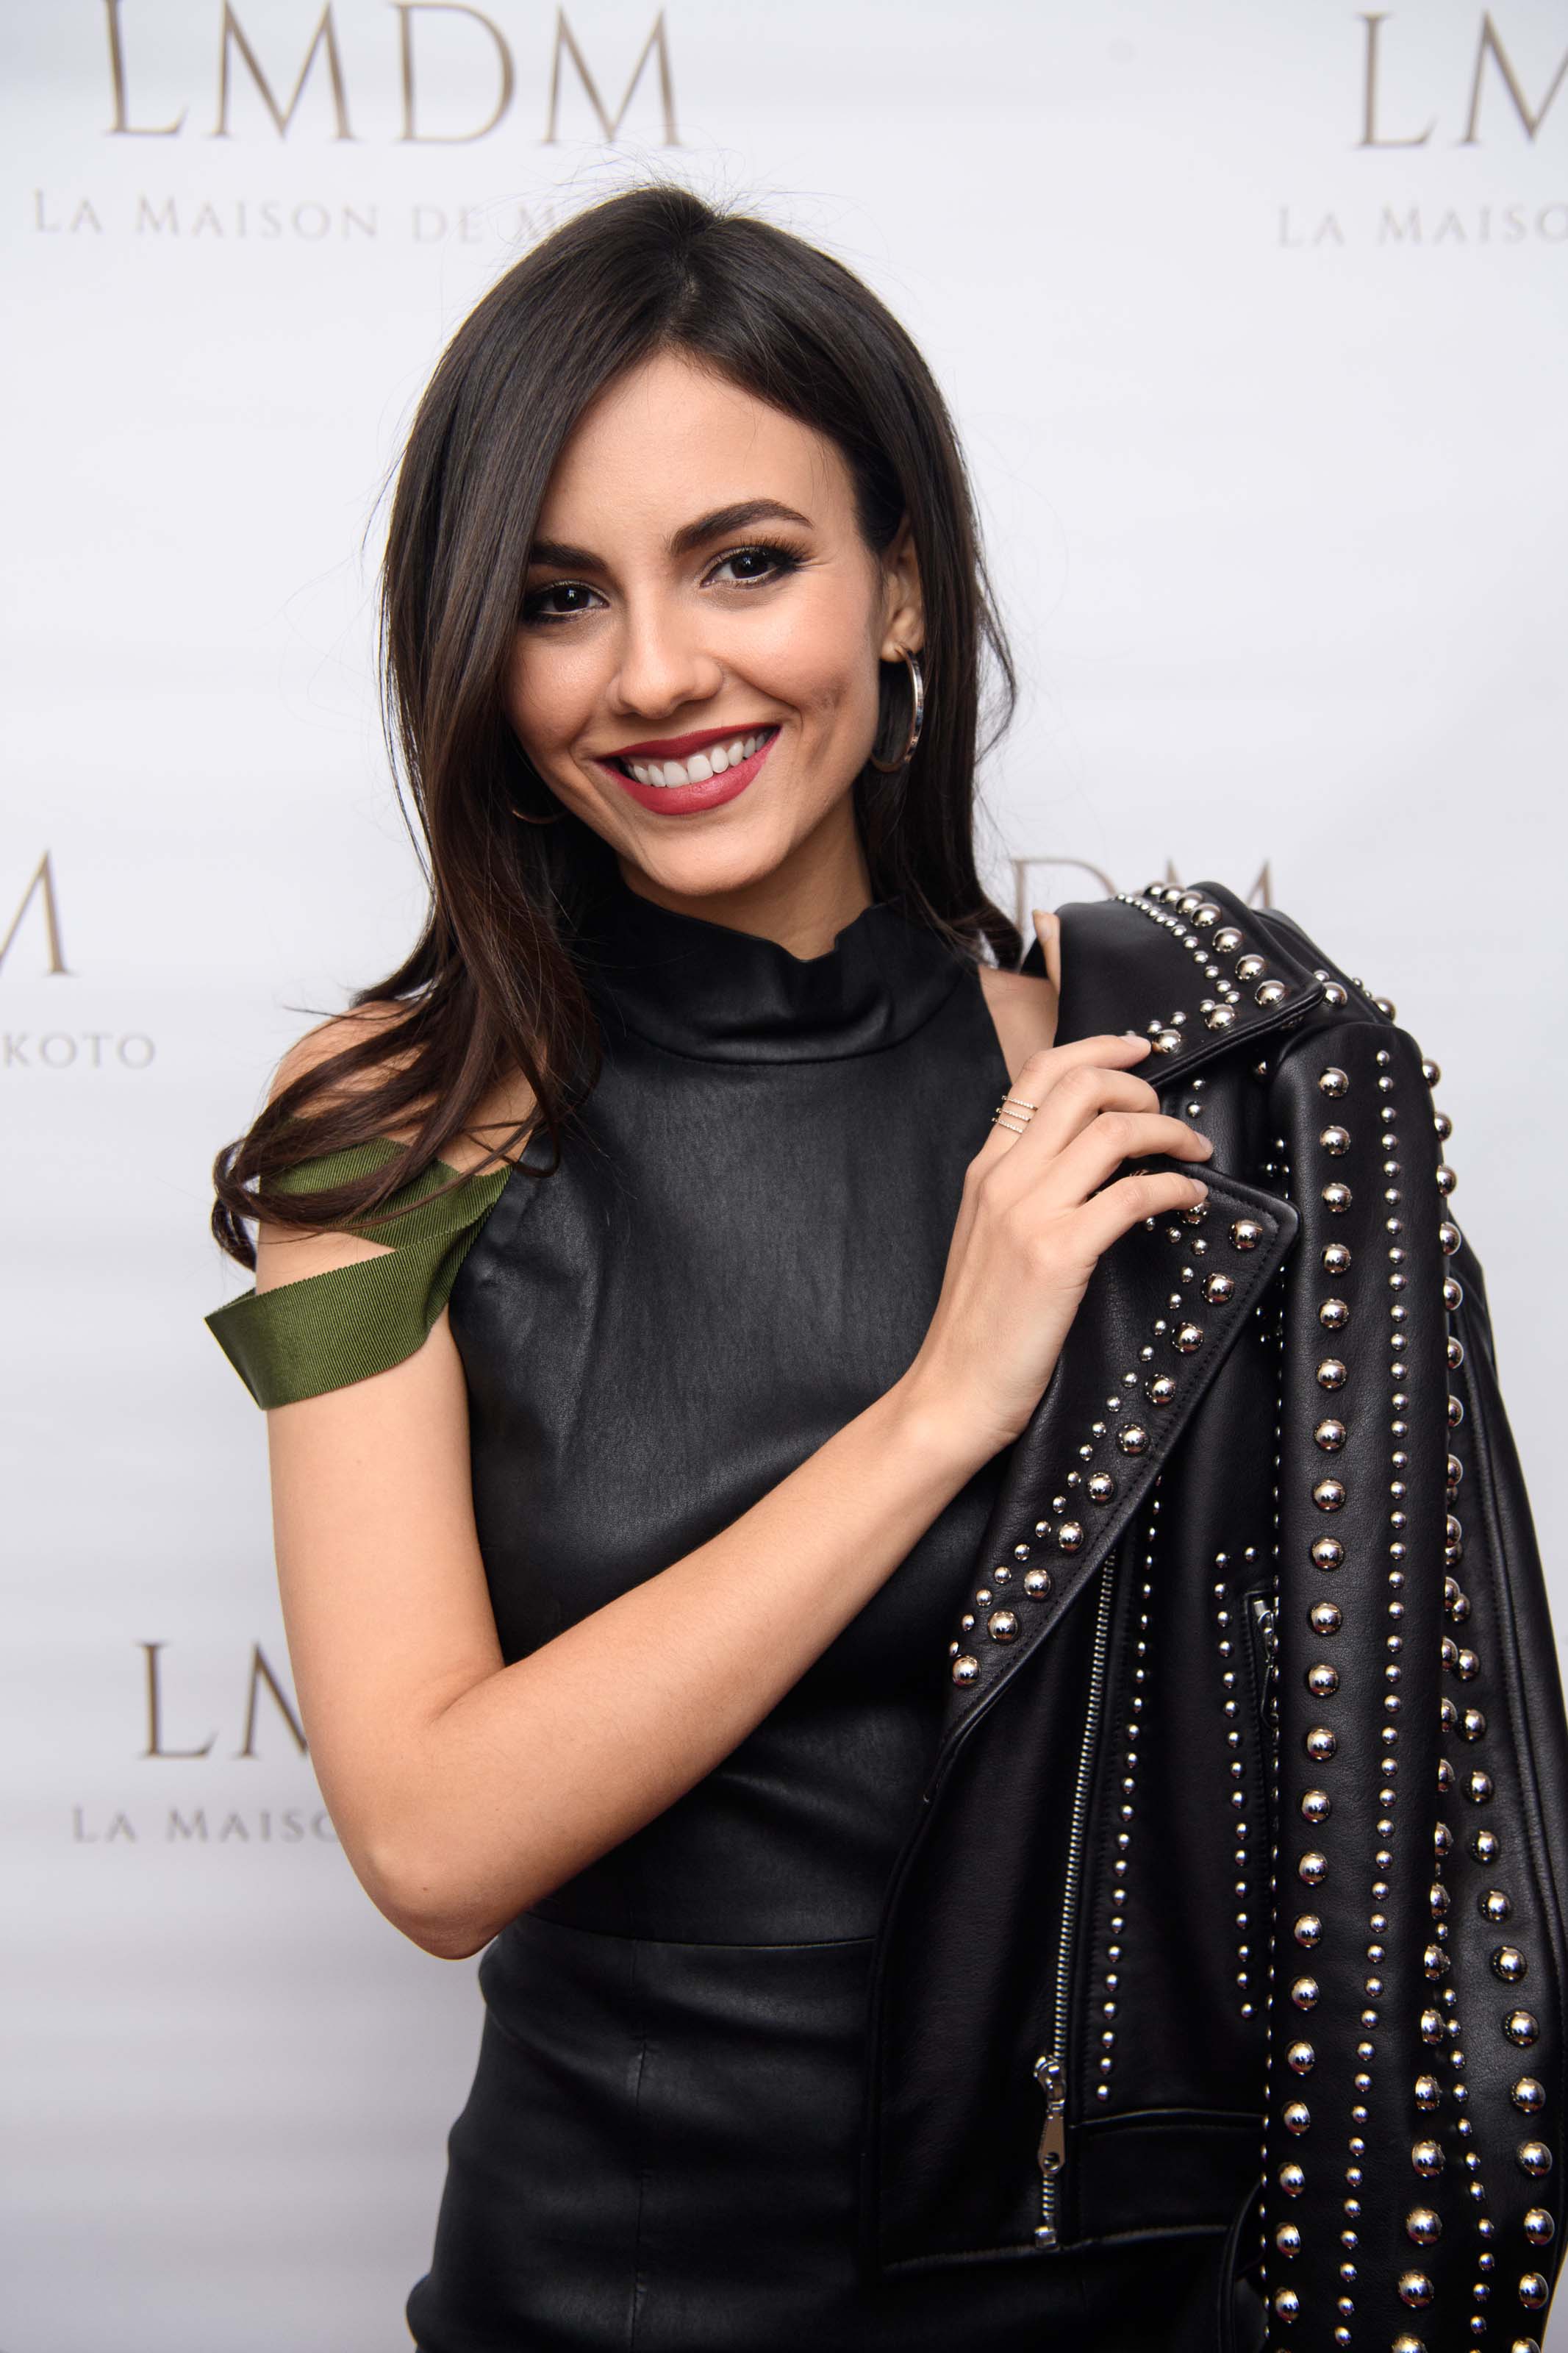 Victoria Justice attends LMDM Grand Opening Party